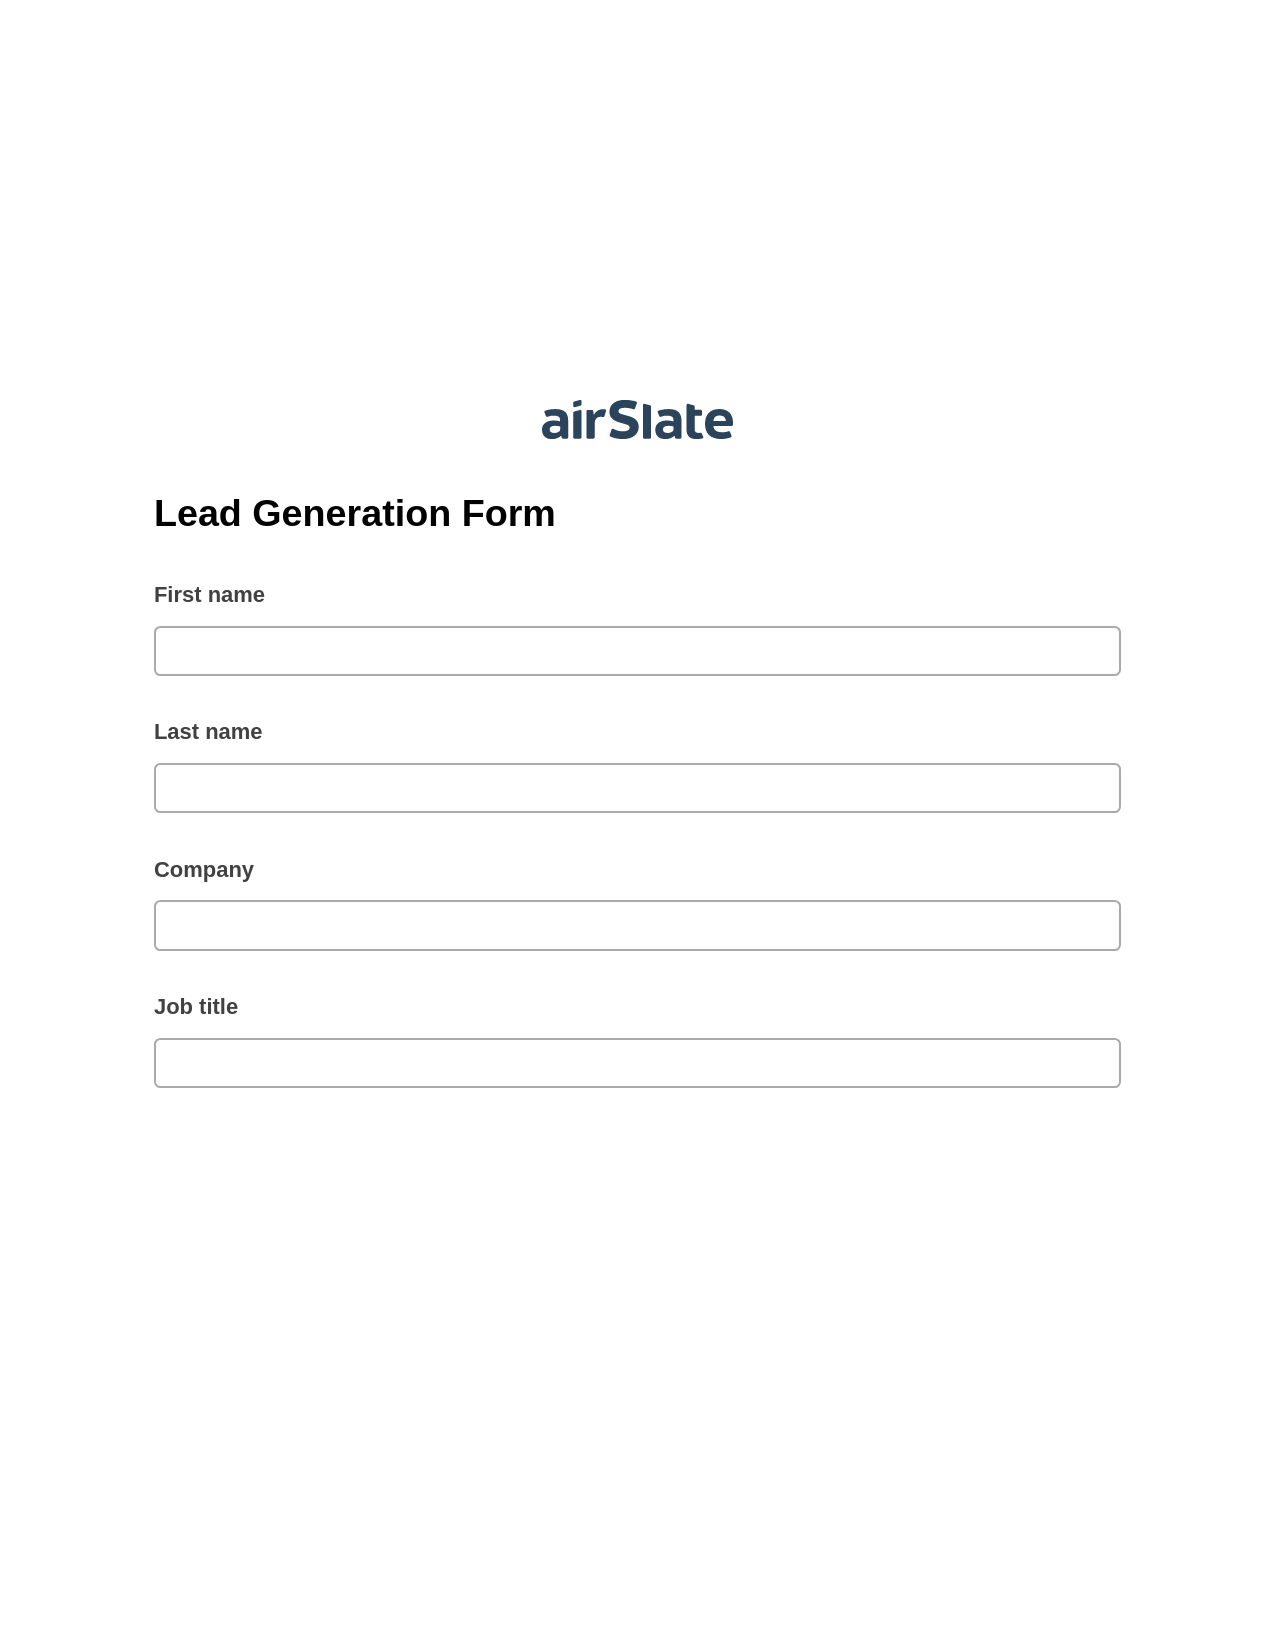 Lead Generation Form Pre-fill from Google Sheets Bot, System Bot - Create a Slate in another Flow, Export to Google Sheet Bot